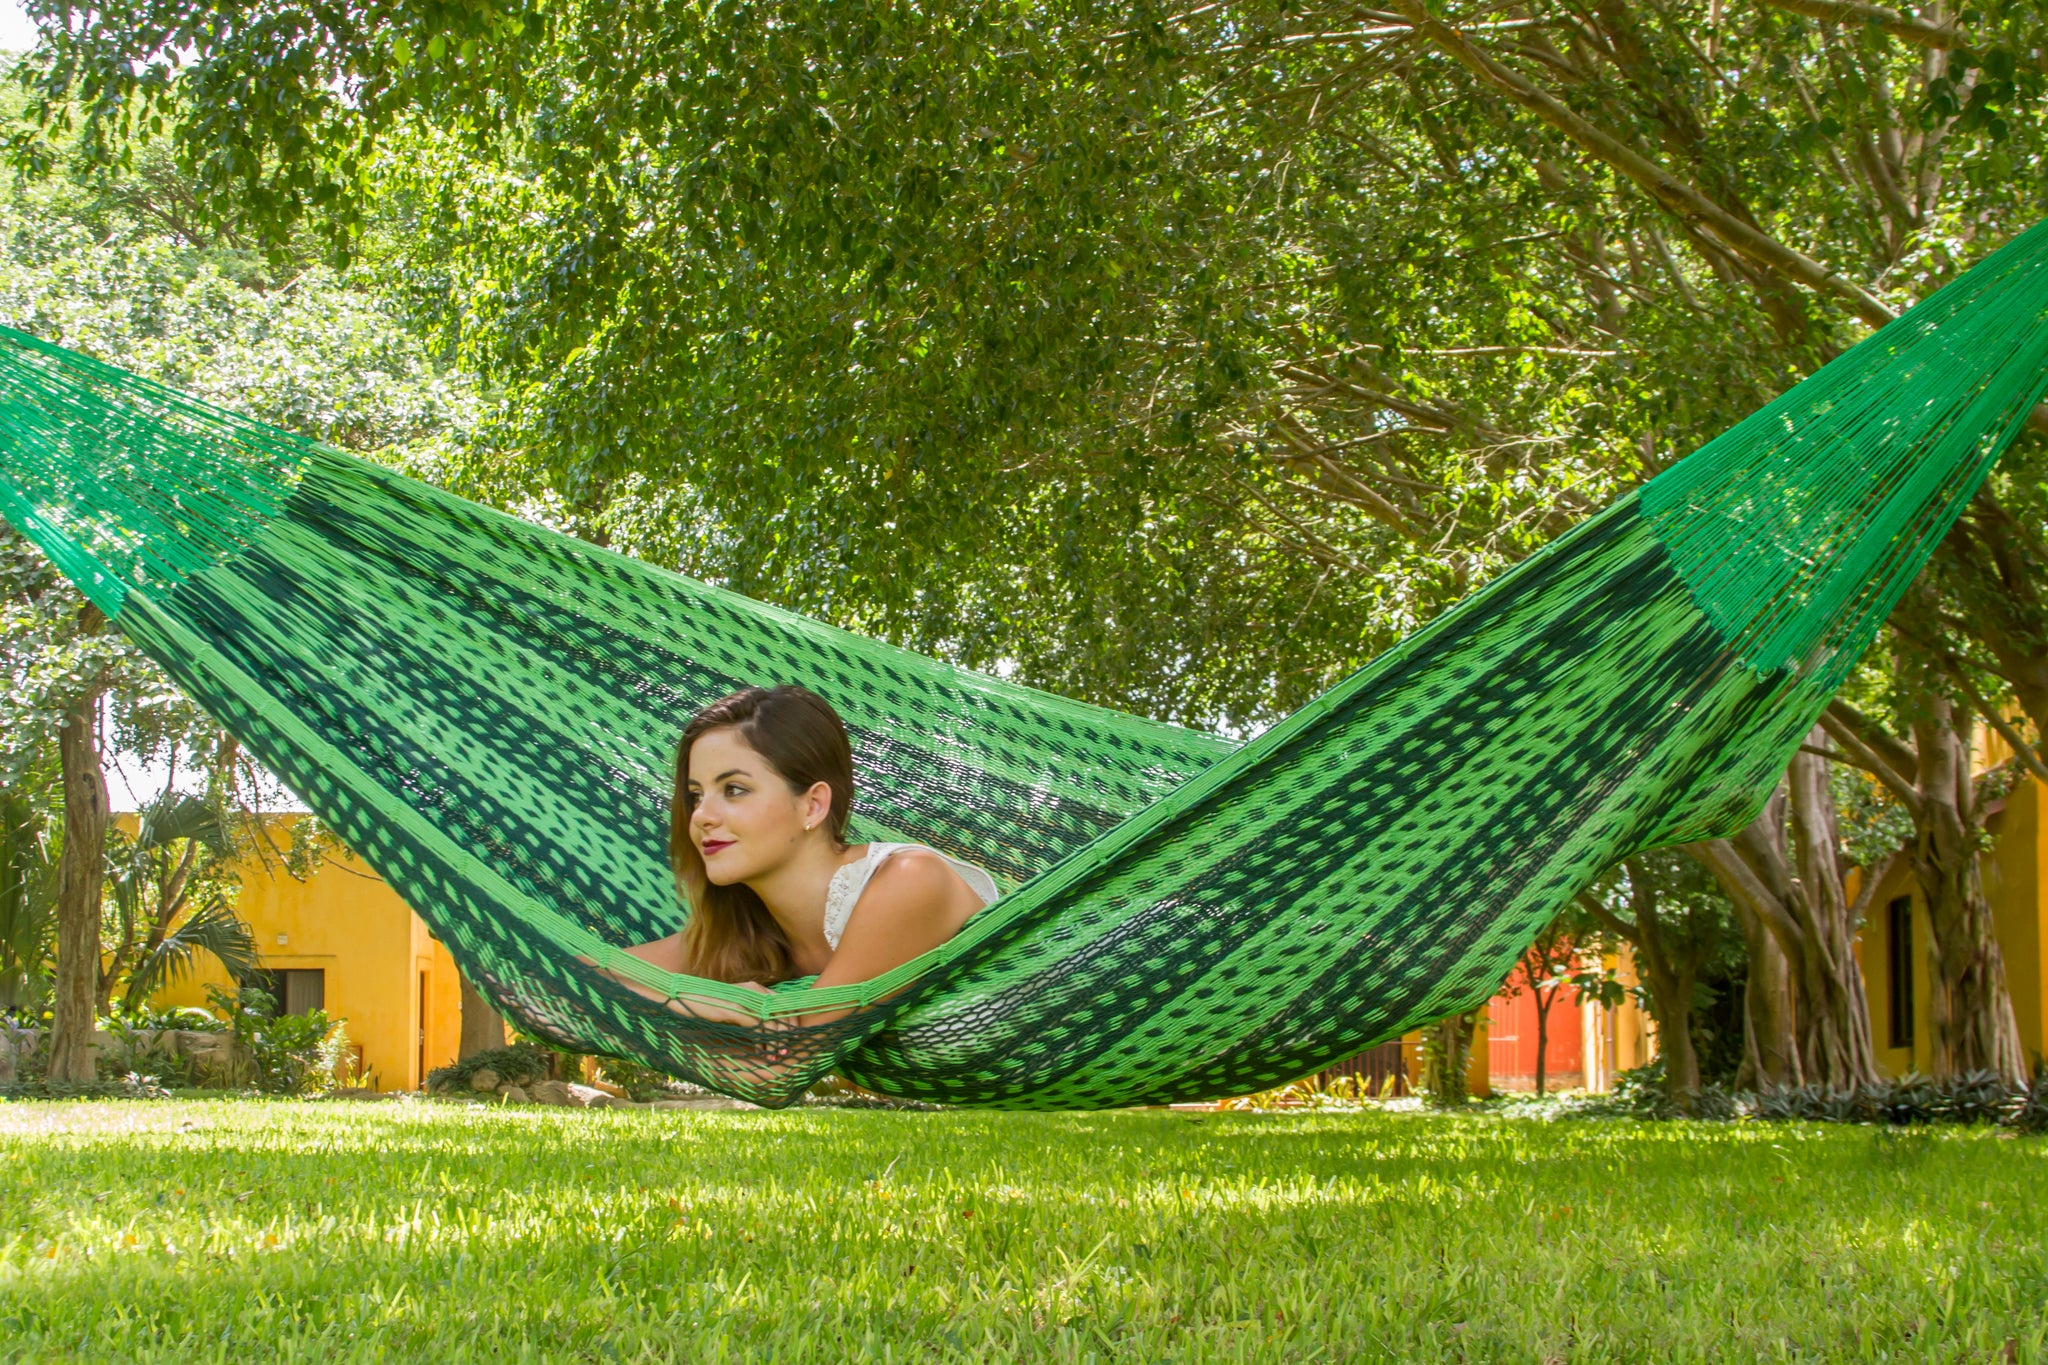 Authentic Mexican Outdoor Undercover Cotton Hammock in Jardin